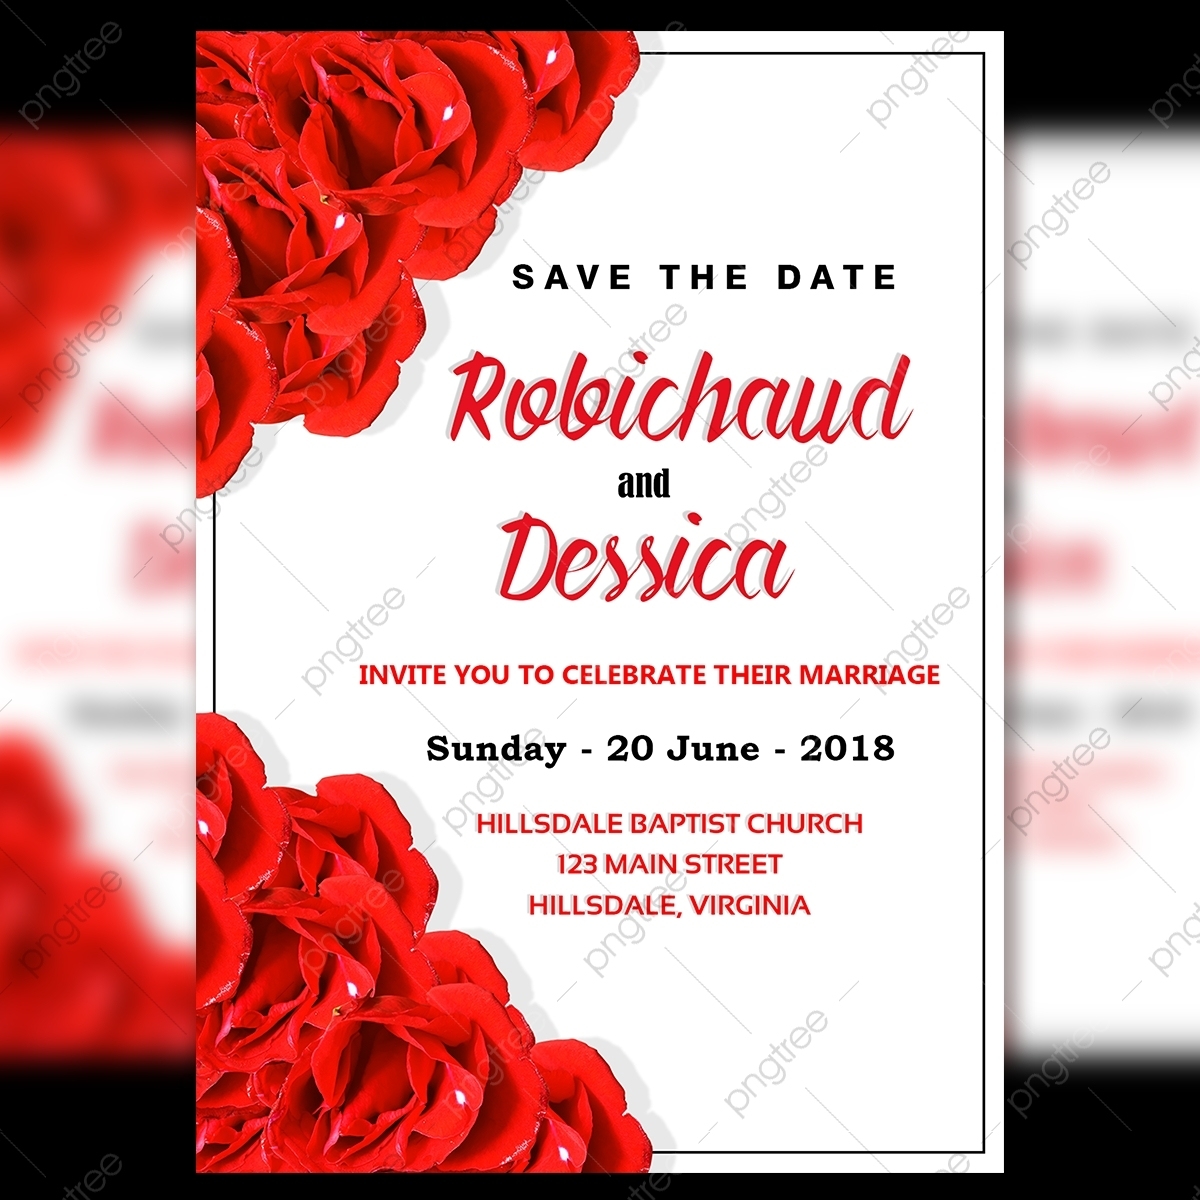 Wedding Invitation Card Template With Fresh Red Flower And White With Regard To Invitation Cards Templates For Marriage